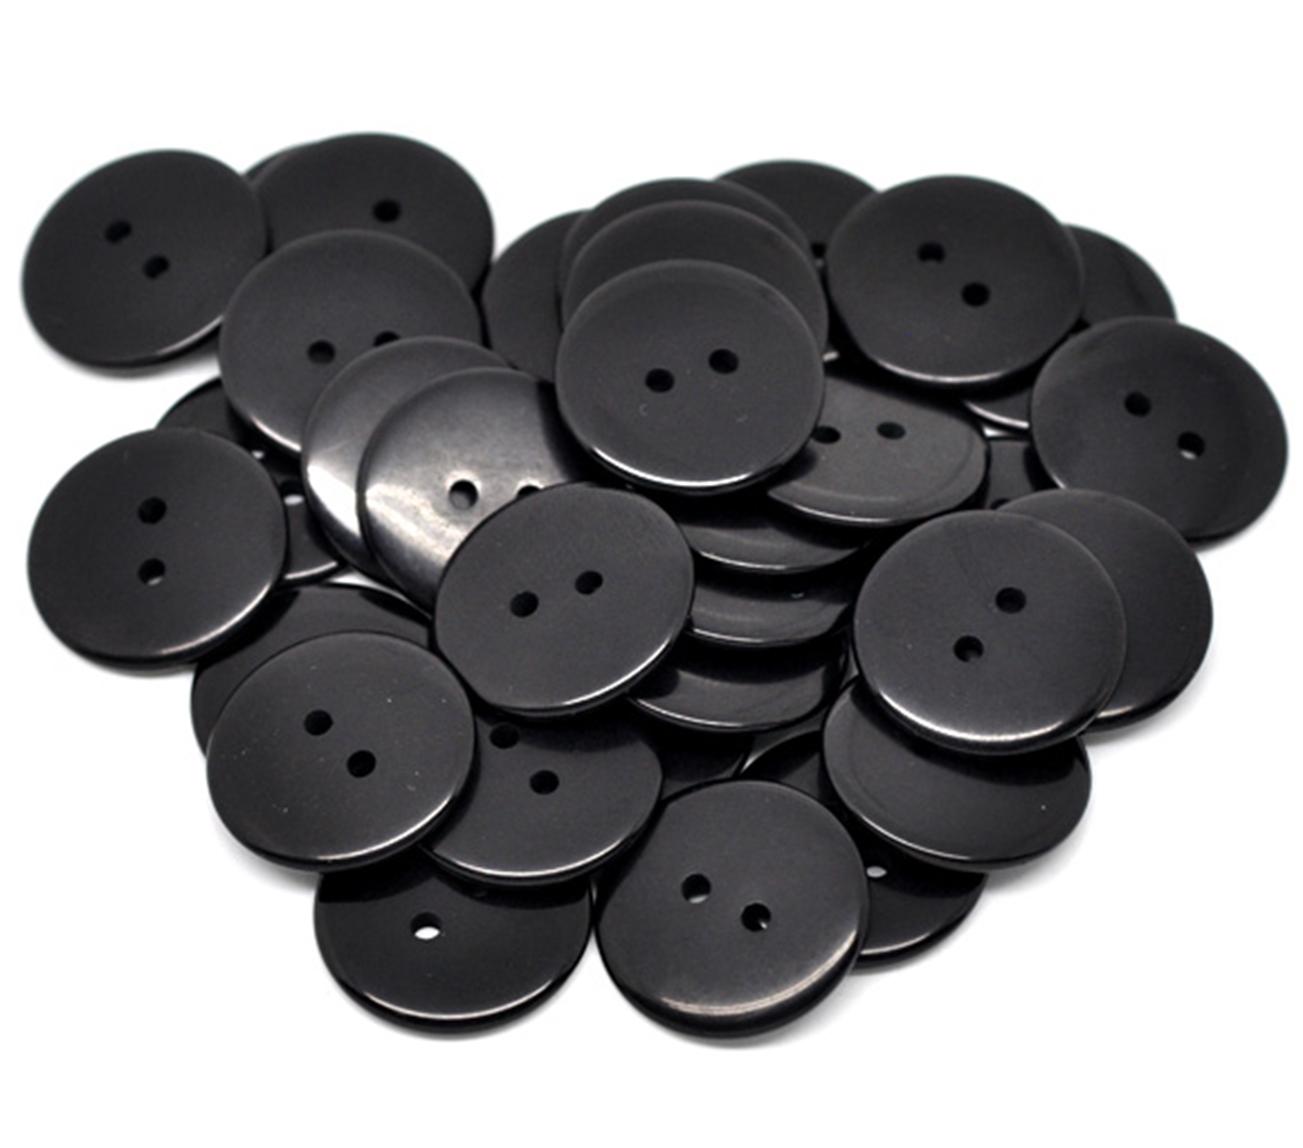 Black 23mm round large resin sewing buttons